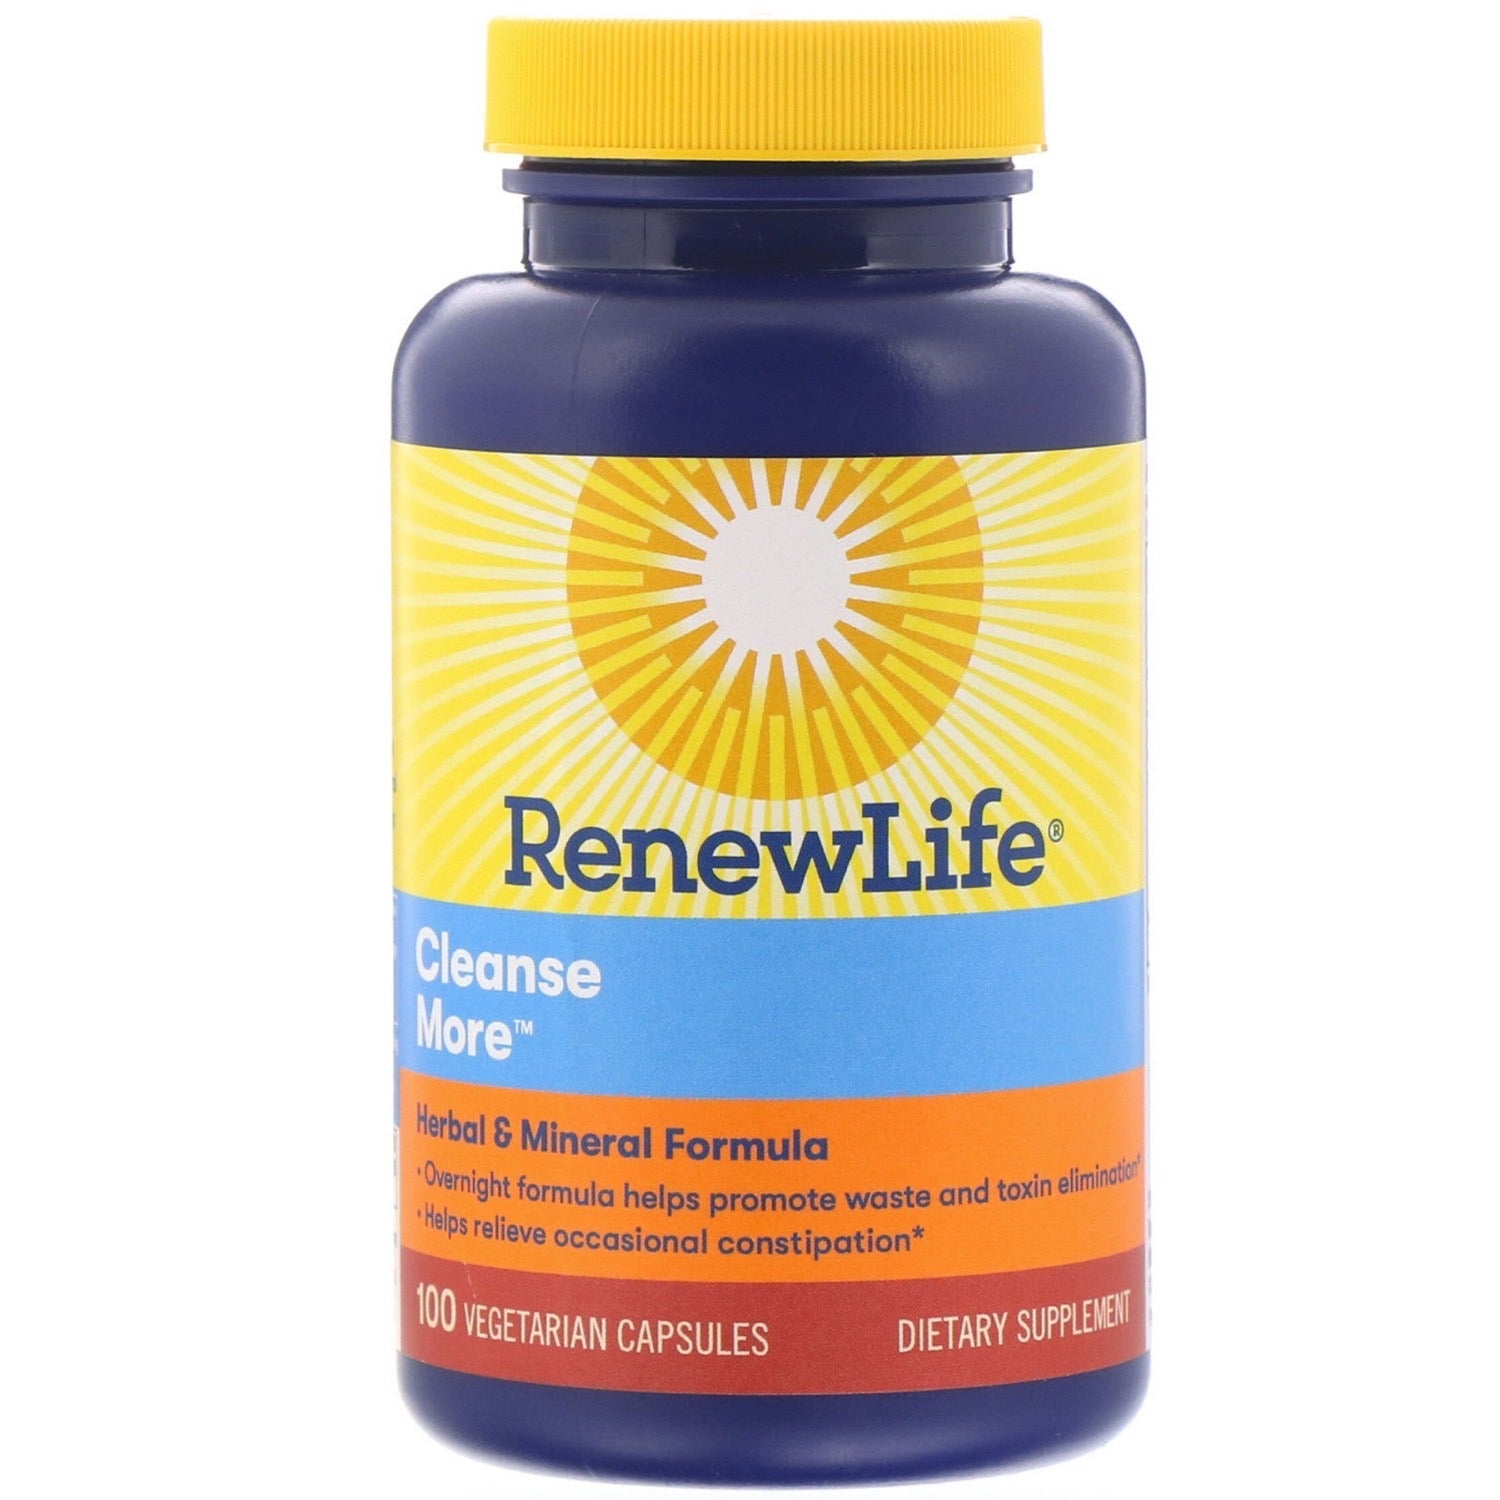 Renew Life Re Adult Cleanse More -Detox, Helps Relieve Occasional Bloating And Restore Regularity, Herbal & Mineral Formula-Overnight Constipation Relief-Gluten, Dairy & Soy Free-100 Vegetarian Capsules